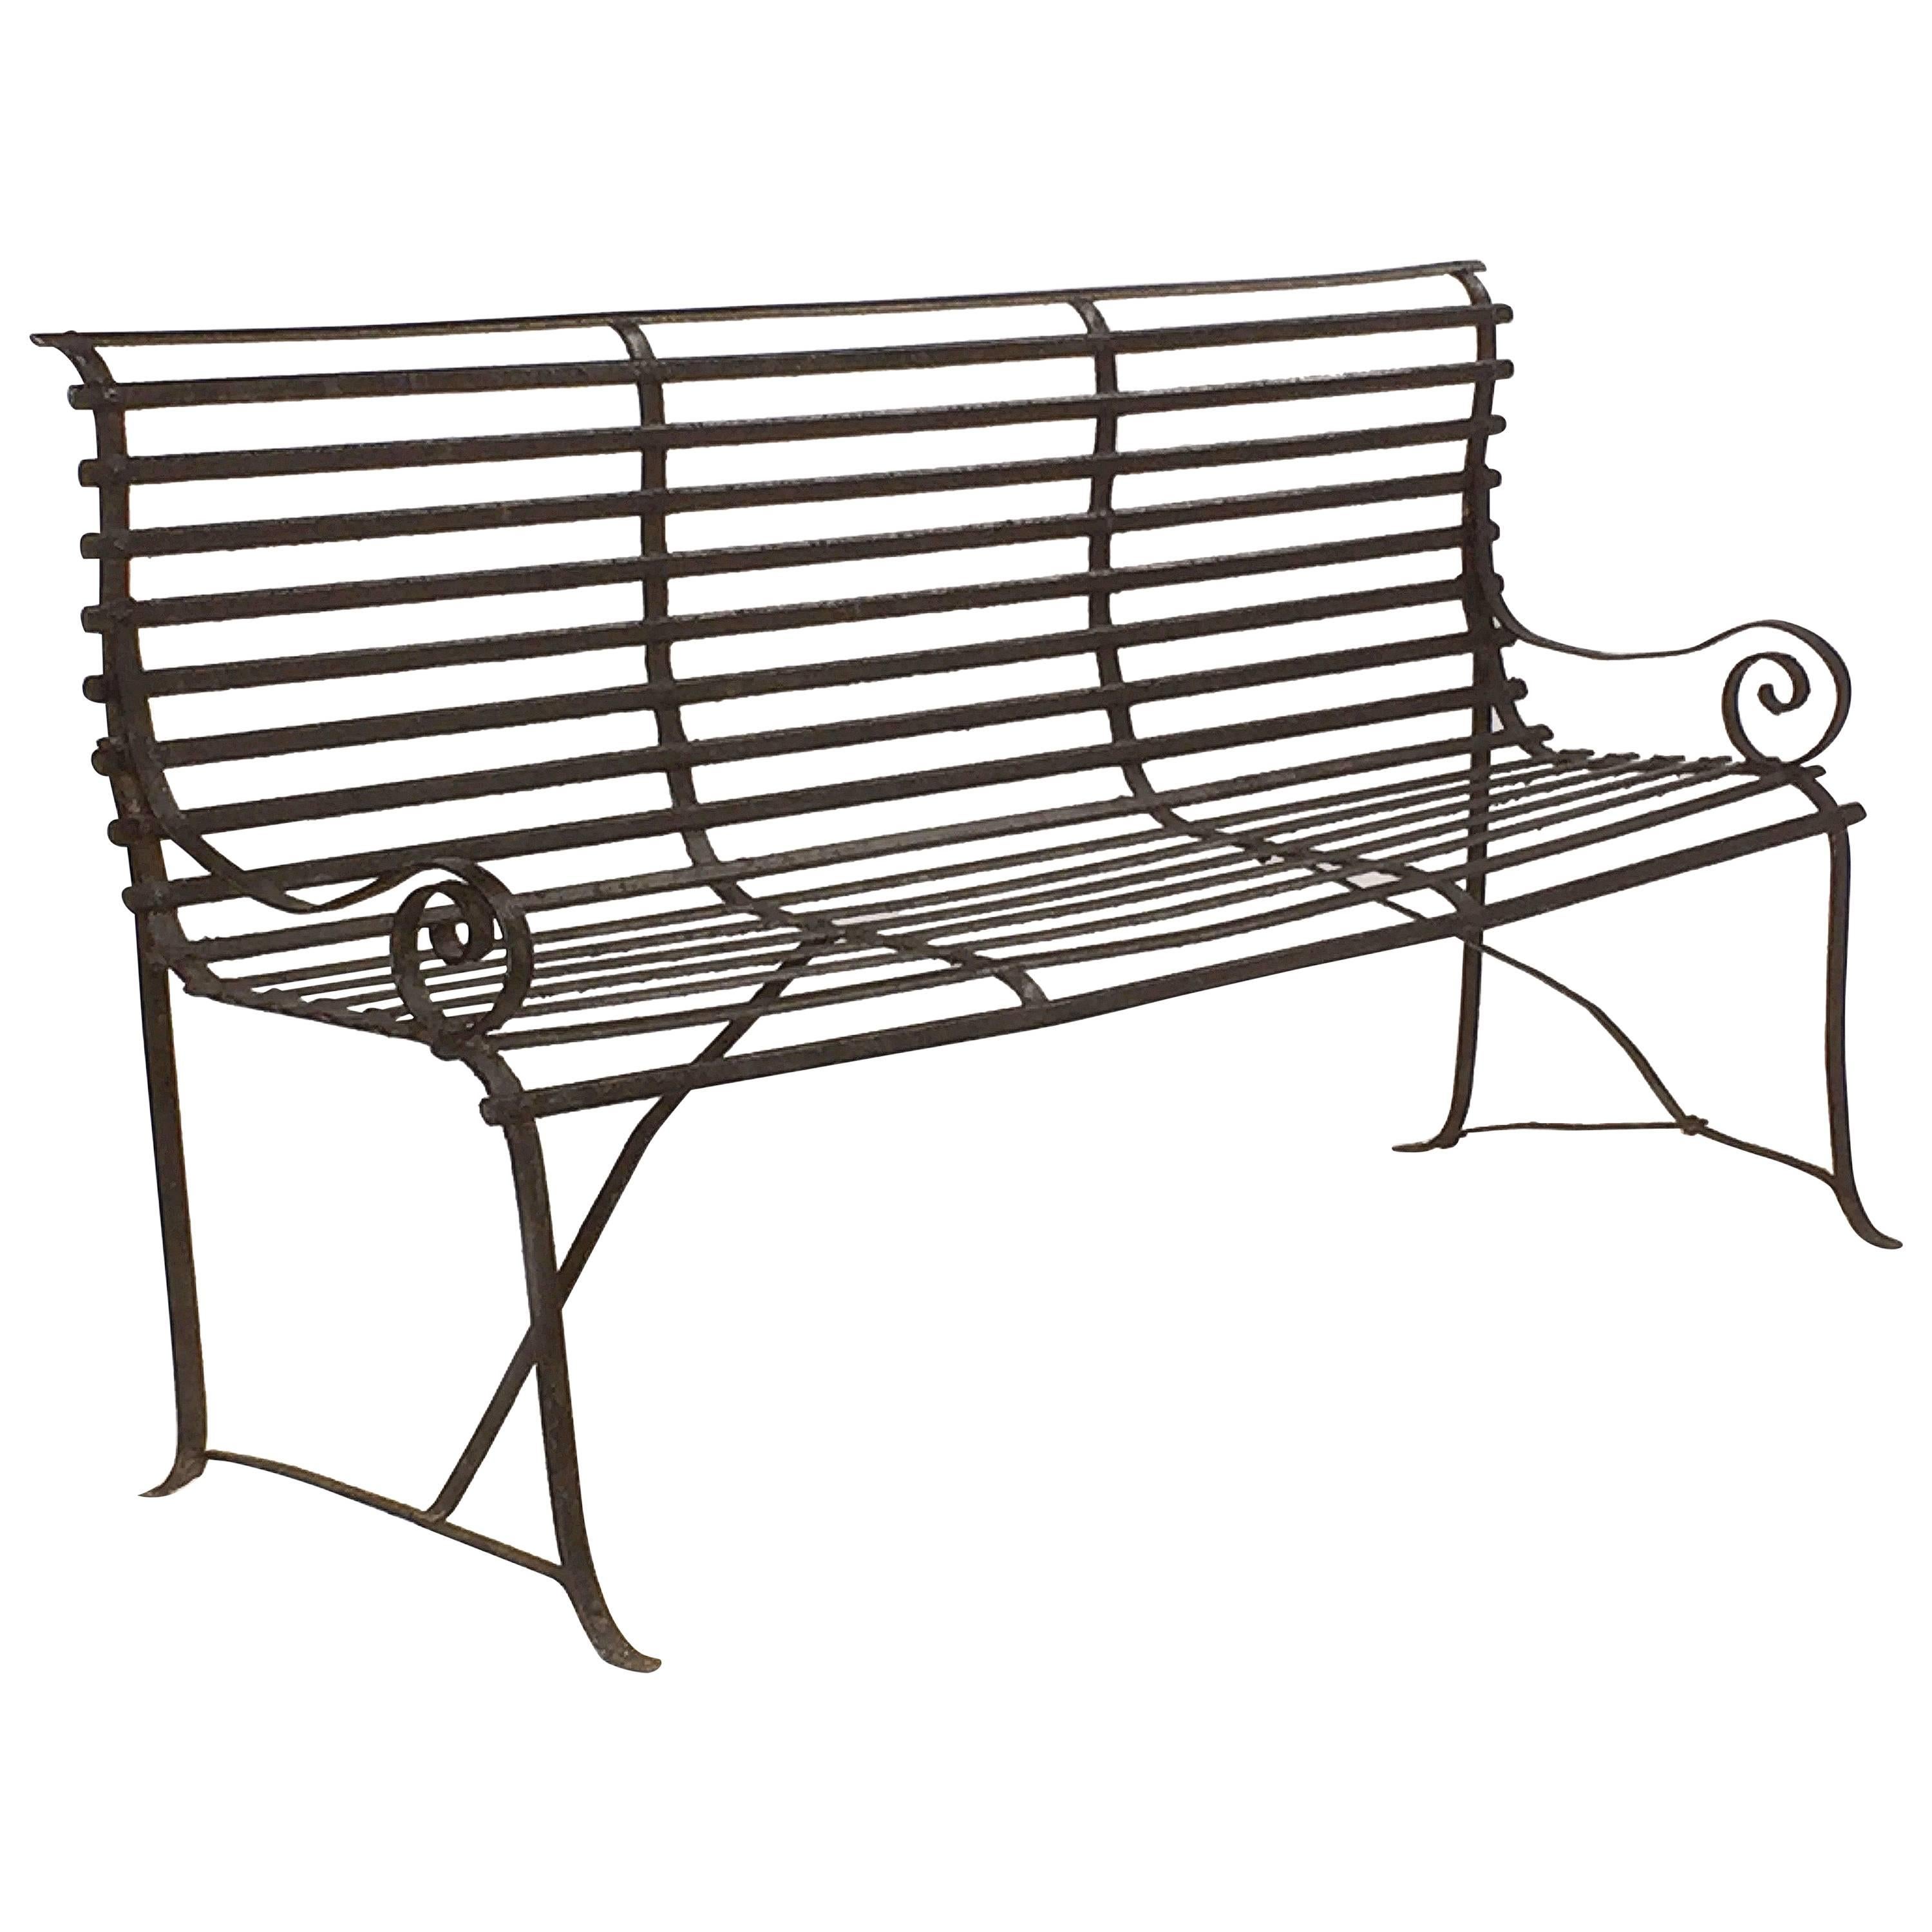 American Garden Seating Bench of Painted Iron